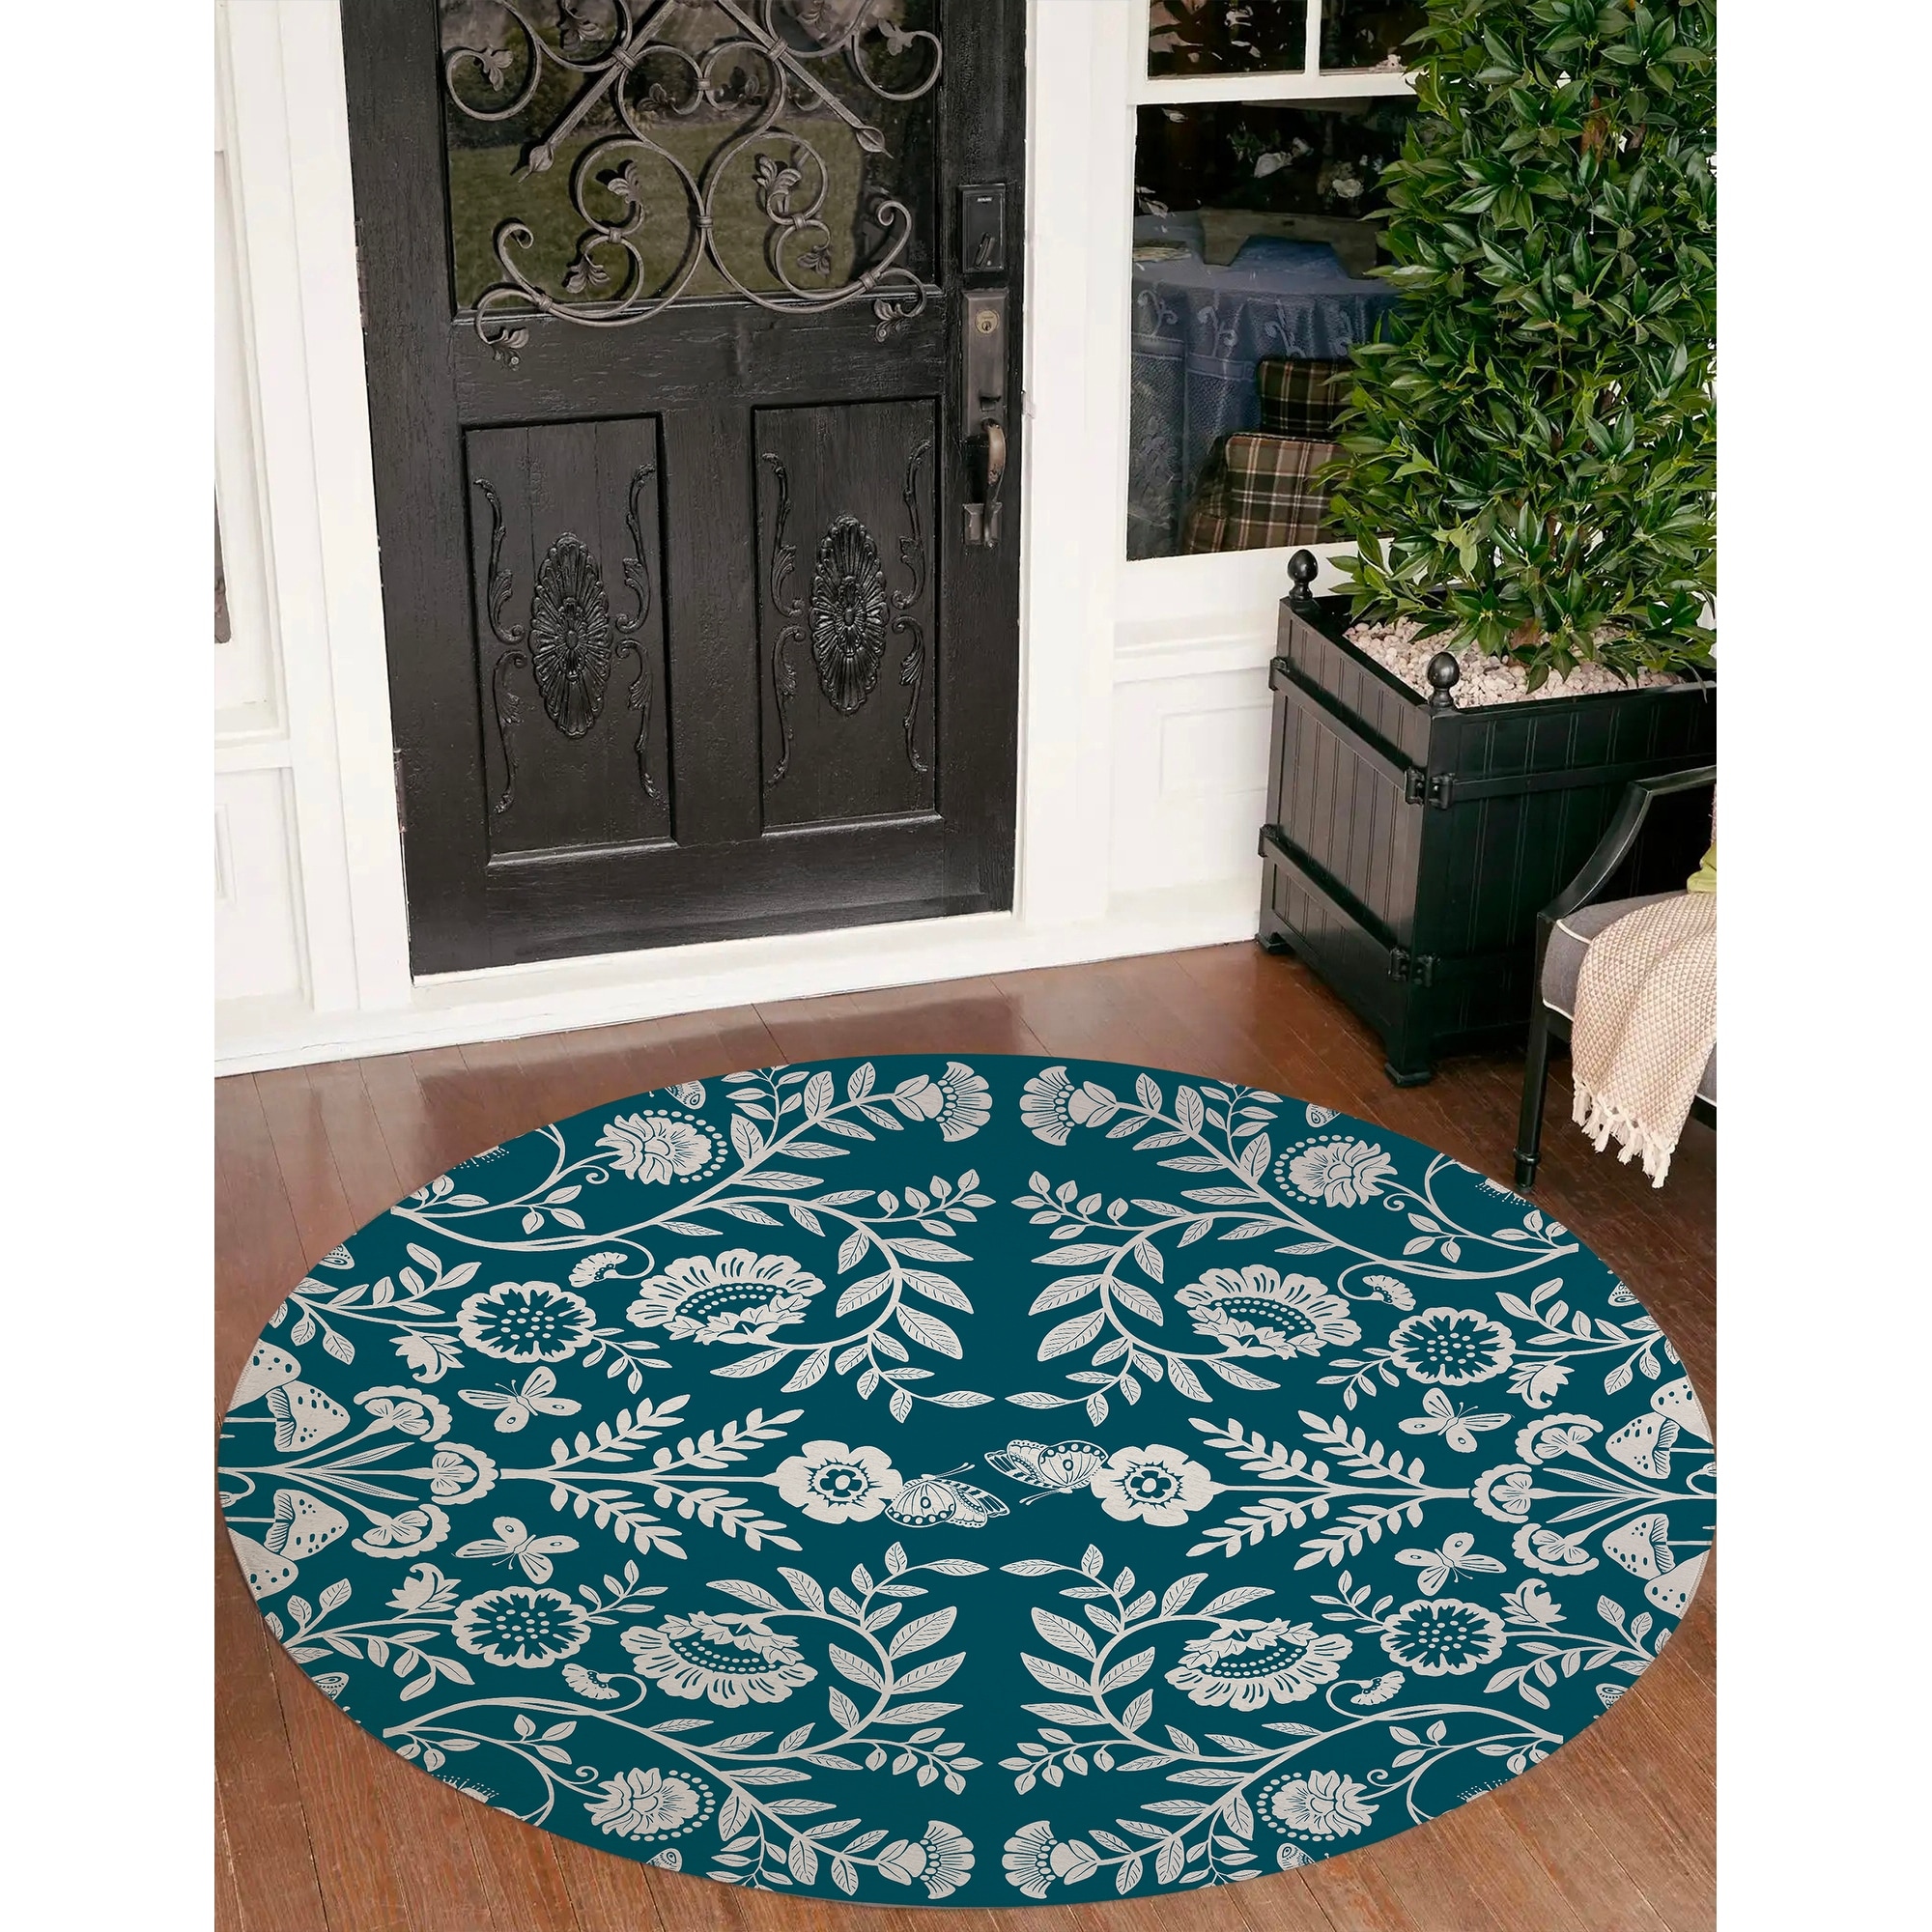 https://ak1.ostkcdn.com/images/products/is/images/direct/5a2e26ddf2b041668b8f5f6640f475ed9573dd42/AUTUMN-BUTTERFLY-GARDEN-TEAL-Indoor-Floor-Mat-By-Kavka-Designs.jpg